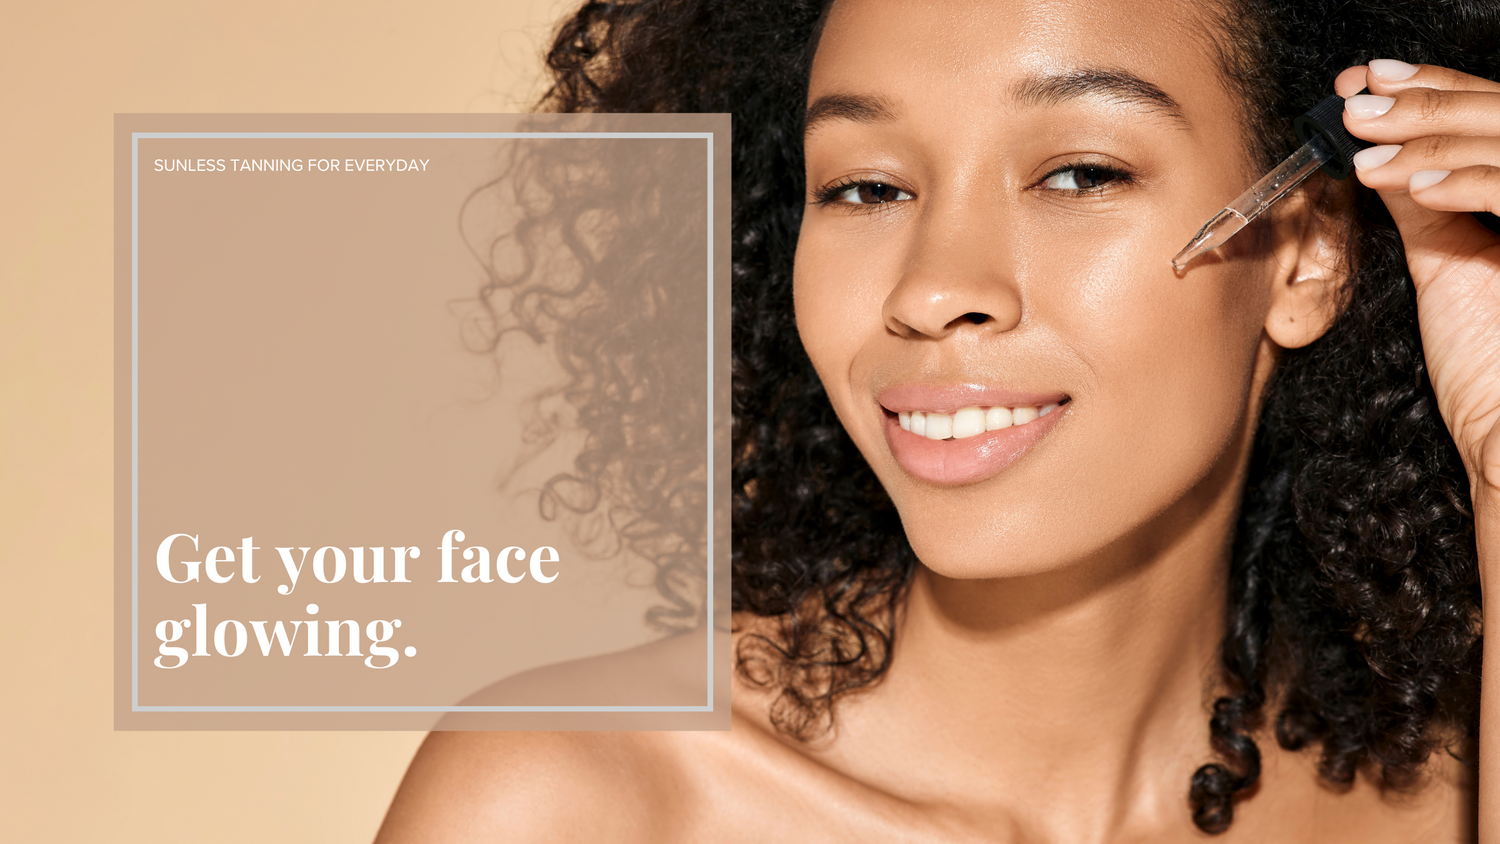 Get Your Face Glowing – Self-Tan Tips for Your Face